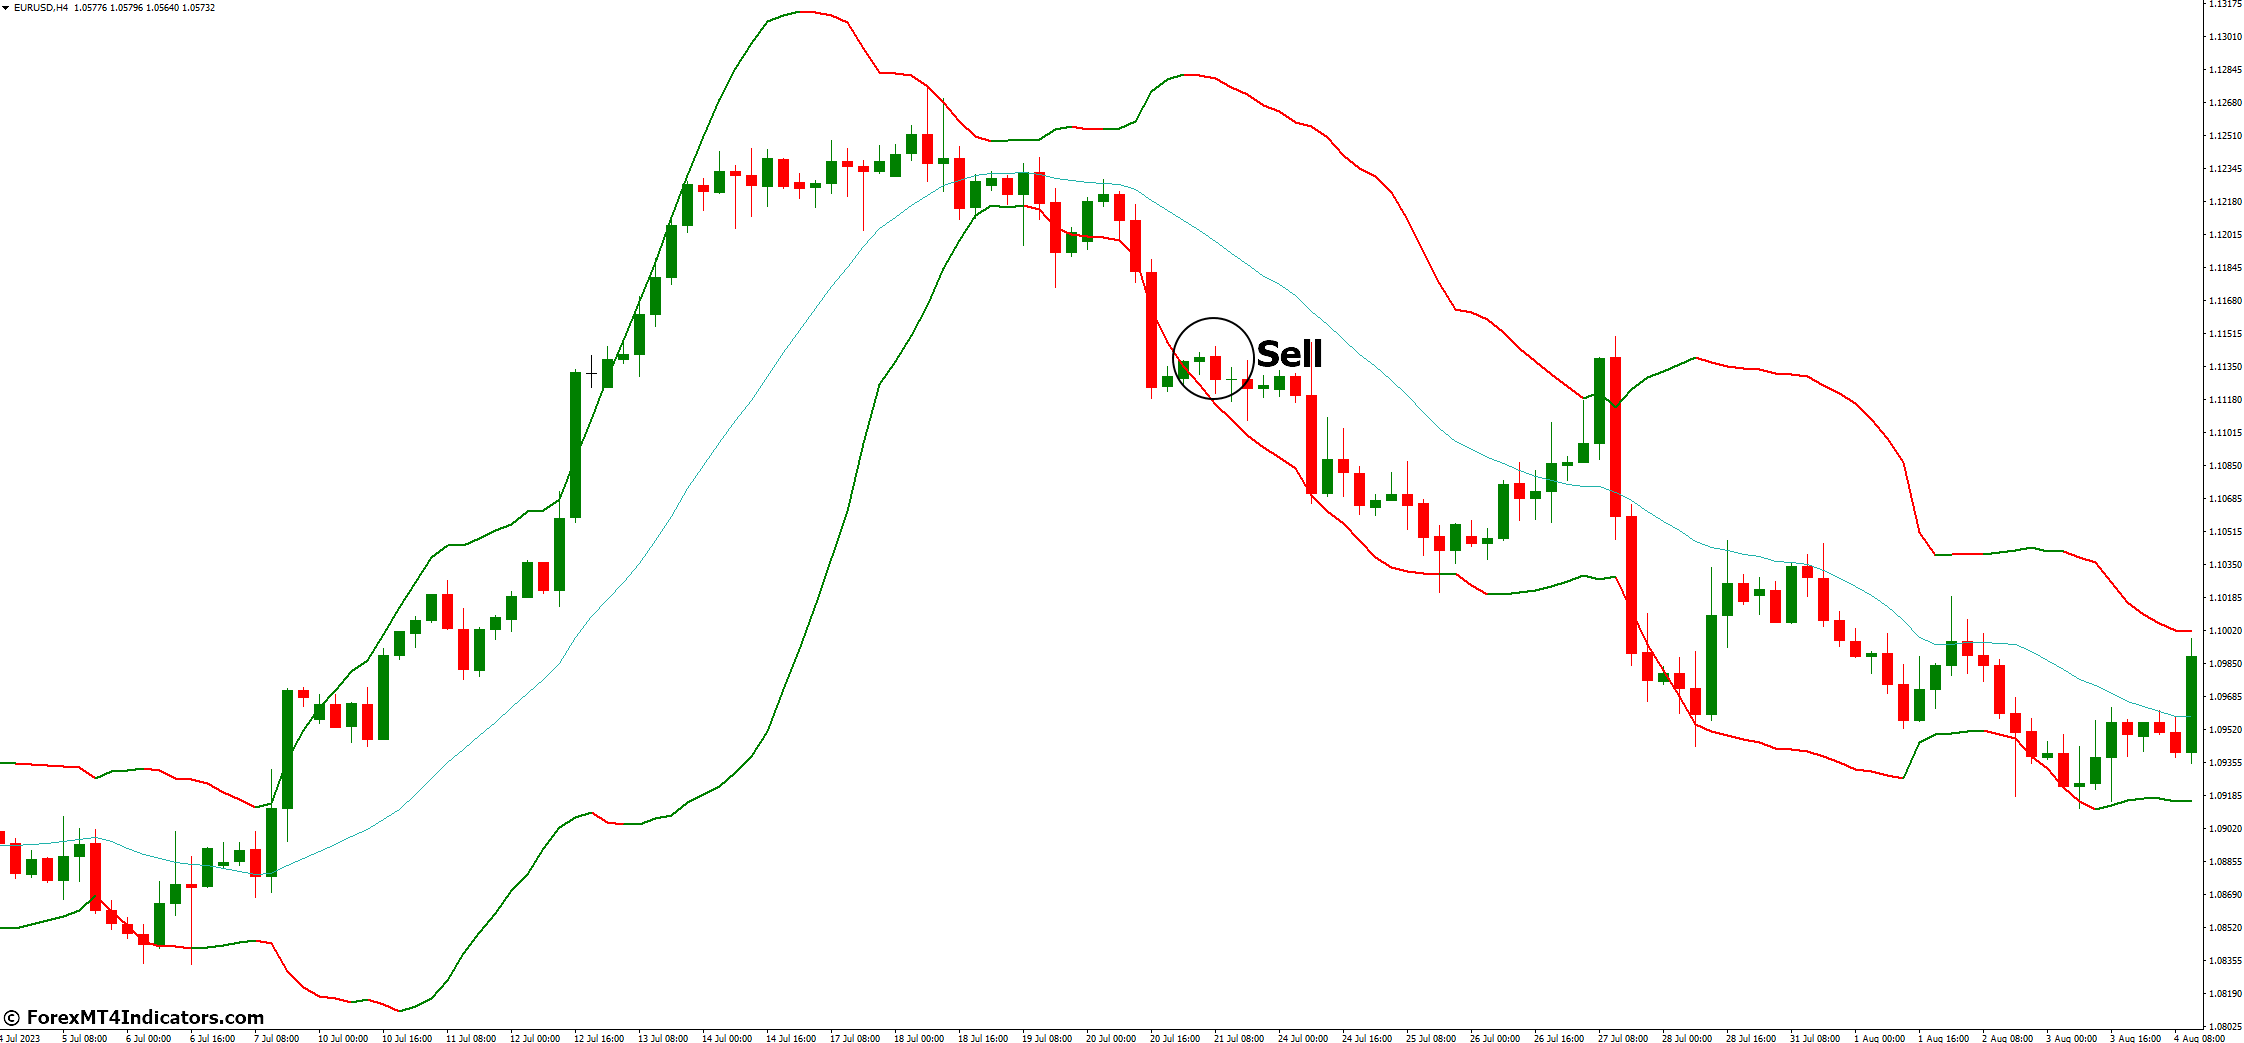 How to Trade with Bollinger Bands Bicolor MT4 Indicator - Sell Entry